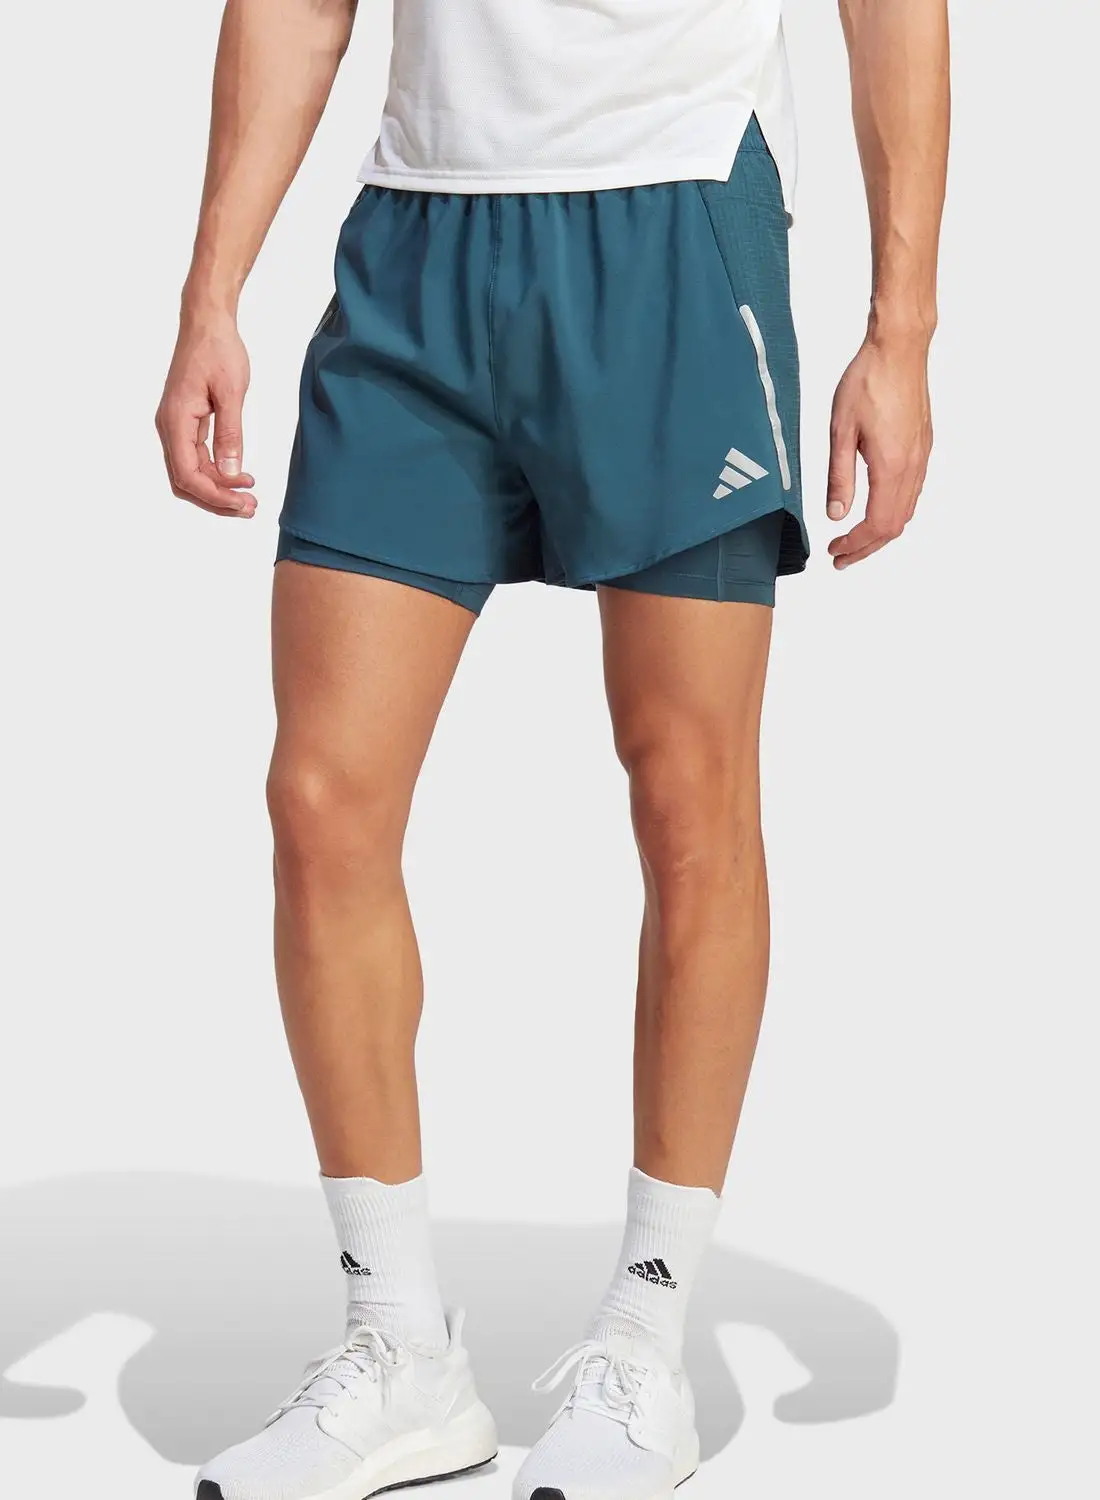 Adidas Designed For Running 2-In-1 Shorts